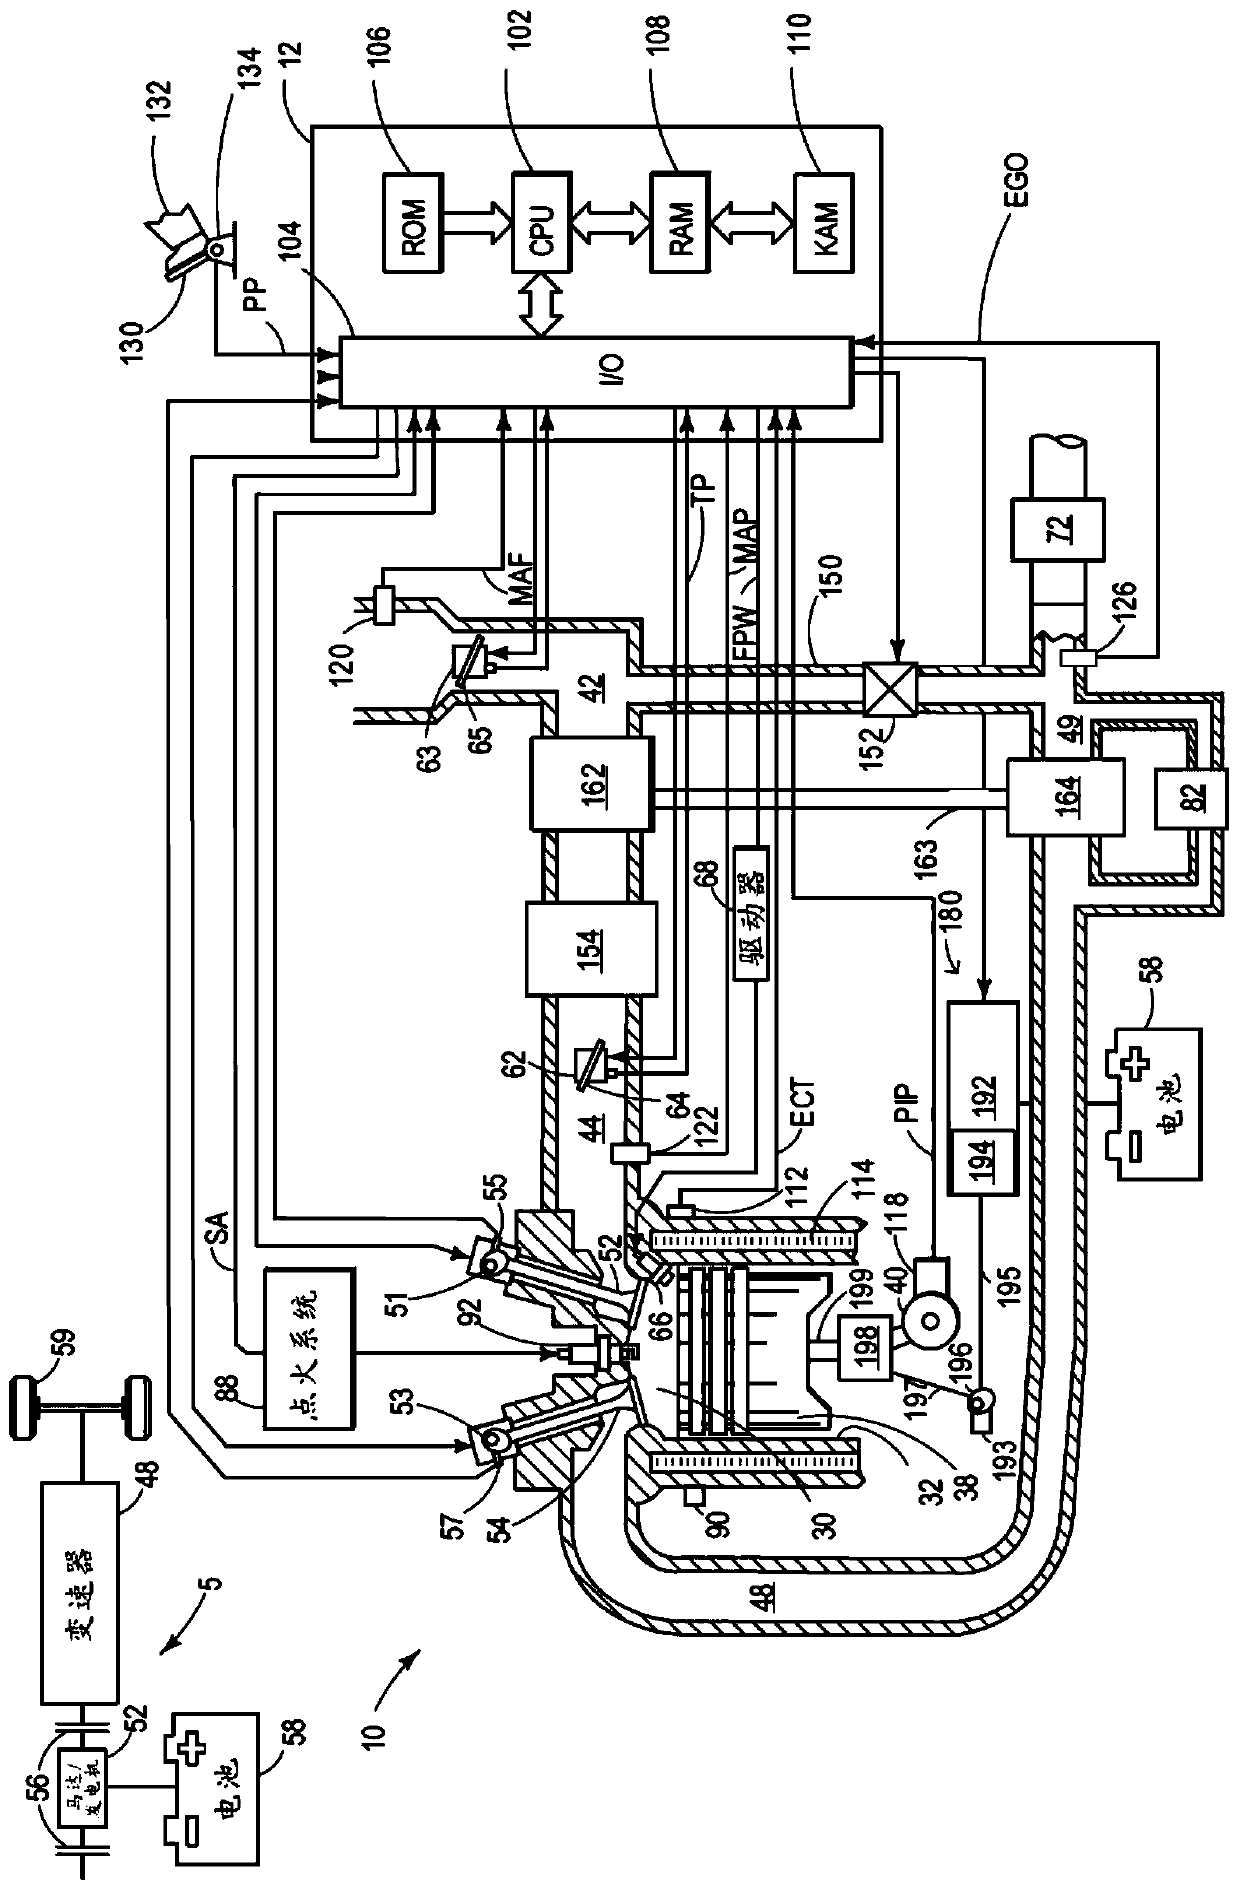 System and method for variable compression ratio engine